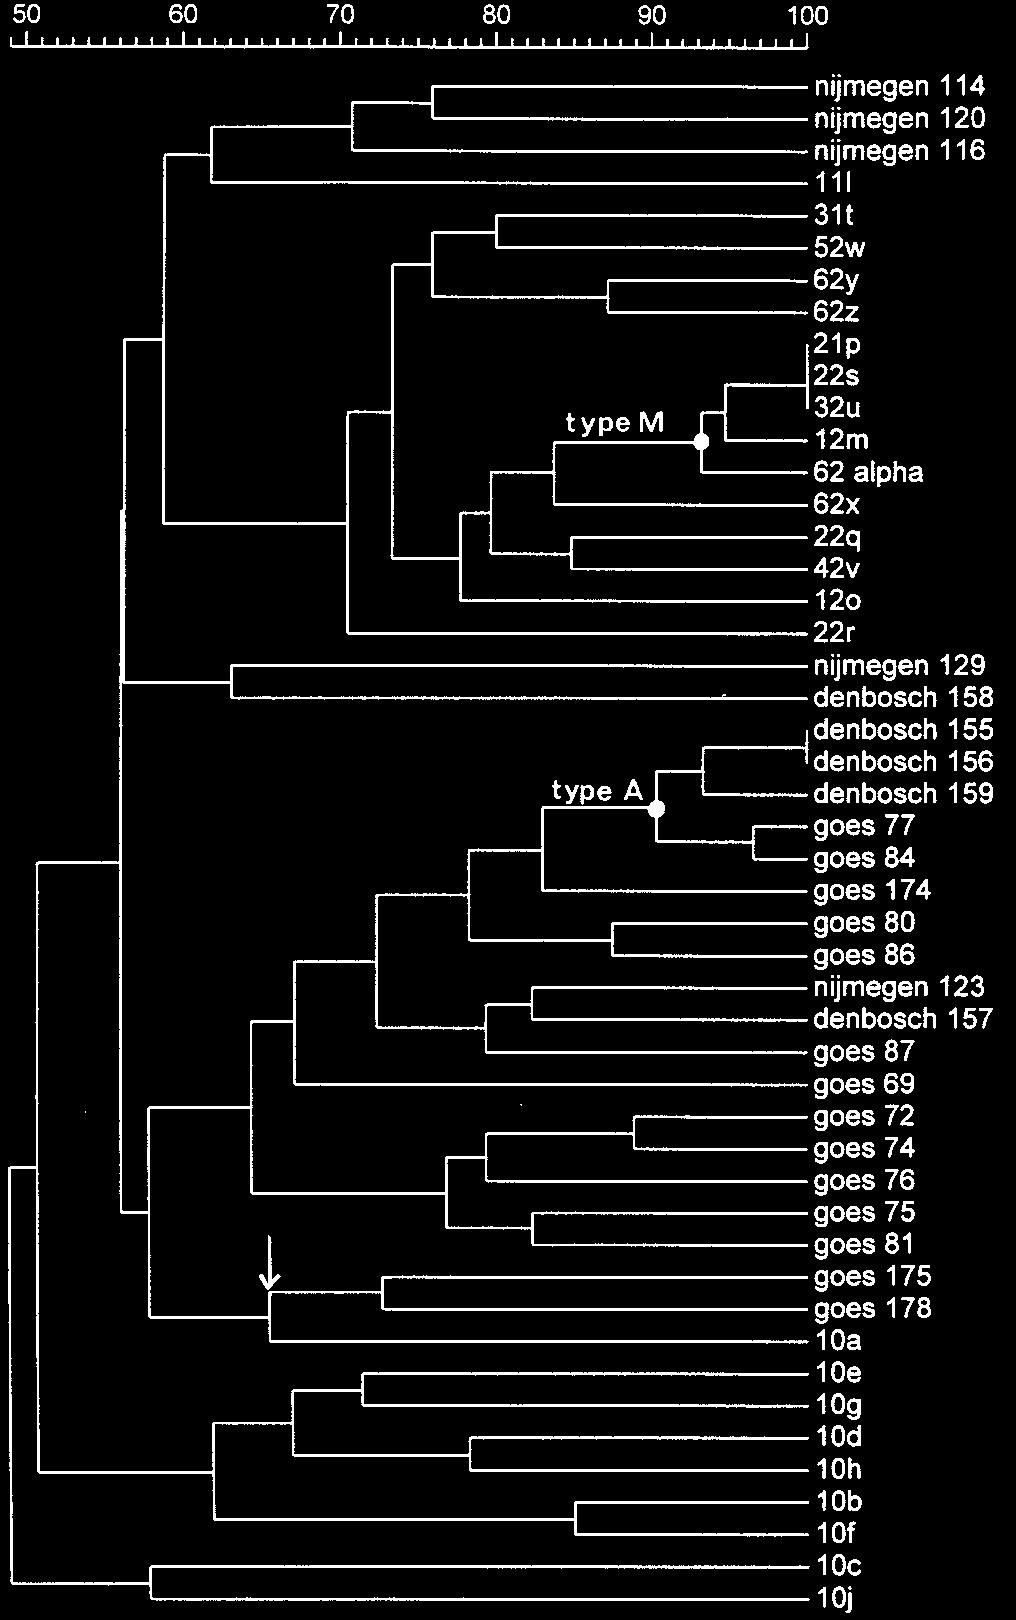 The epidemic PFGE type A clusters at a high homology value (90% for Den Bosch 155 to Goes 84).